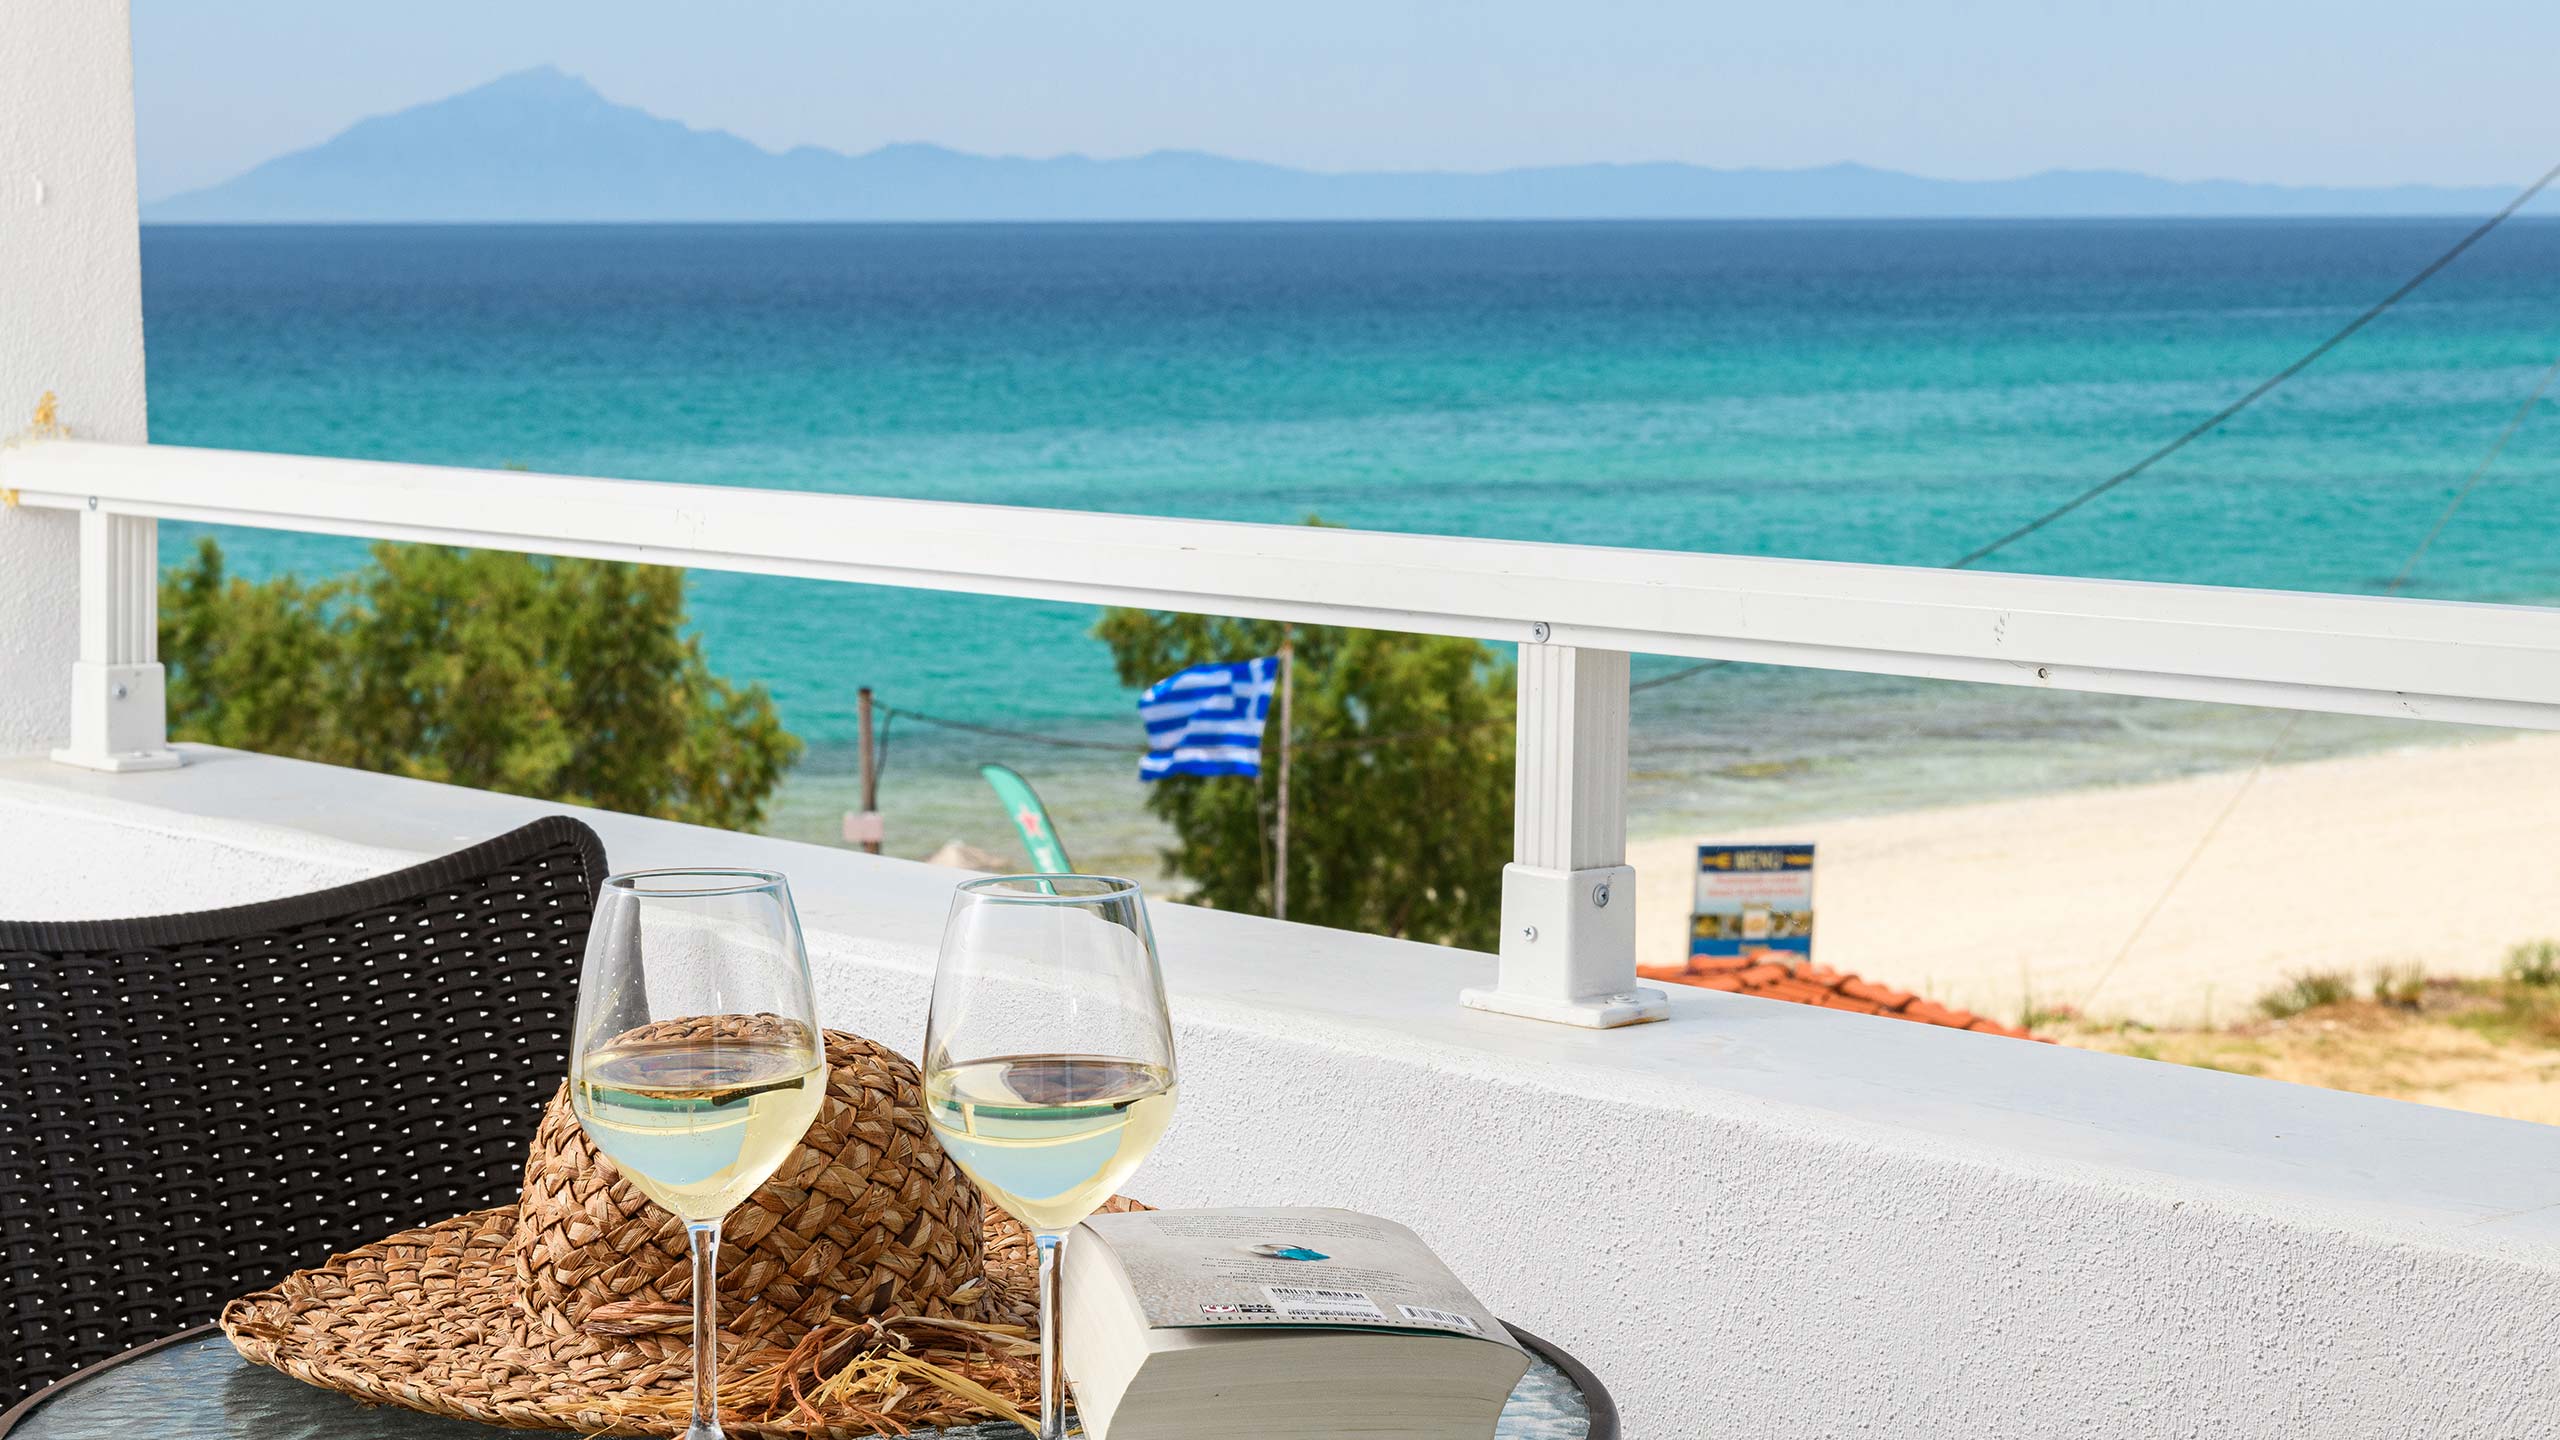 Deluxe Suite Sea View - Boutique Giannikis By The Beach